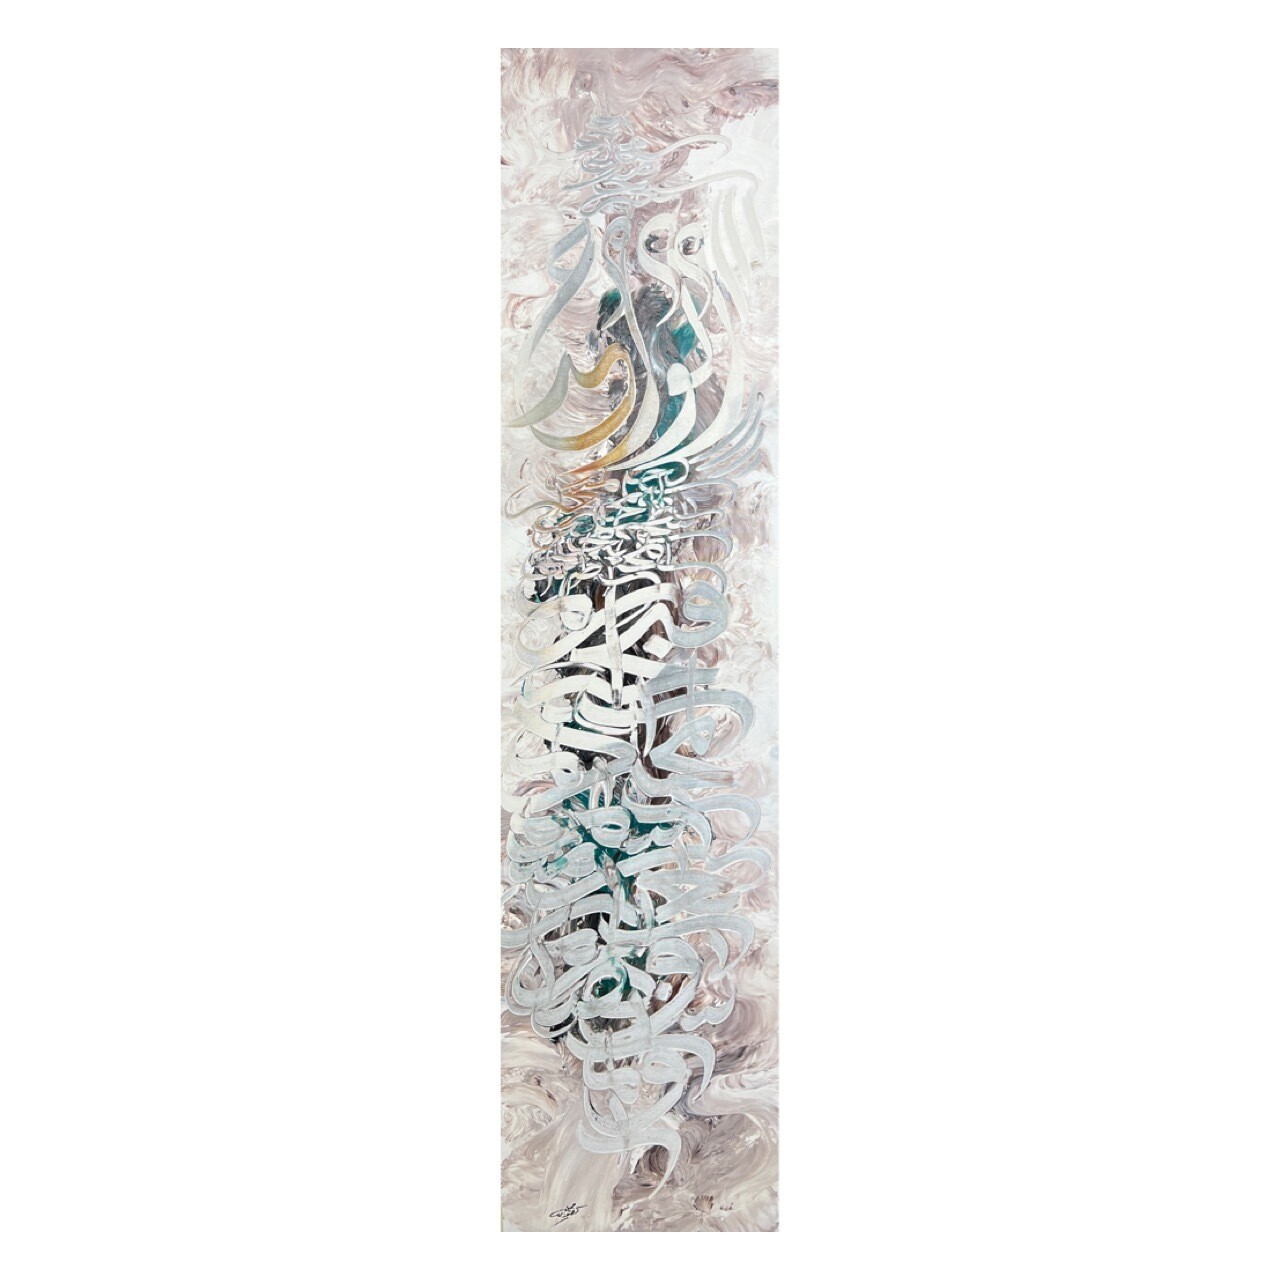 As-Samad - The Eternal - 99 names of Allah -  Textured Multi-Media Original Hand painted Canvas